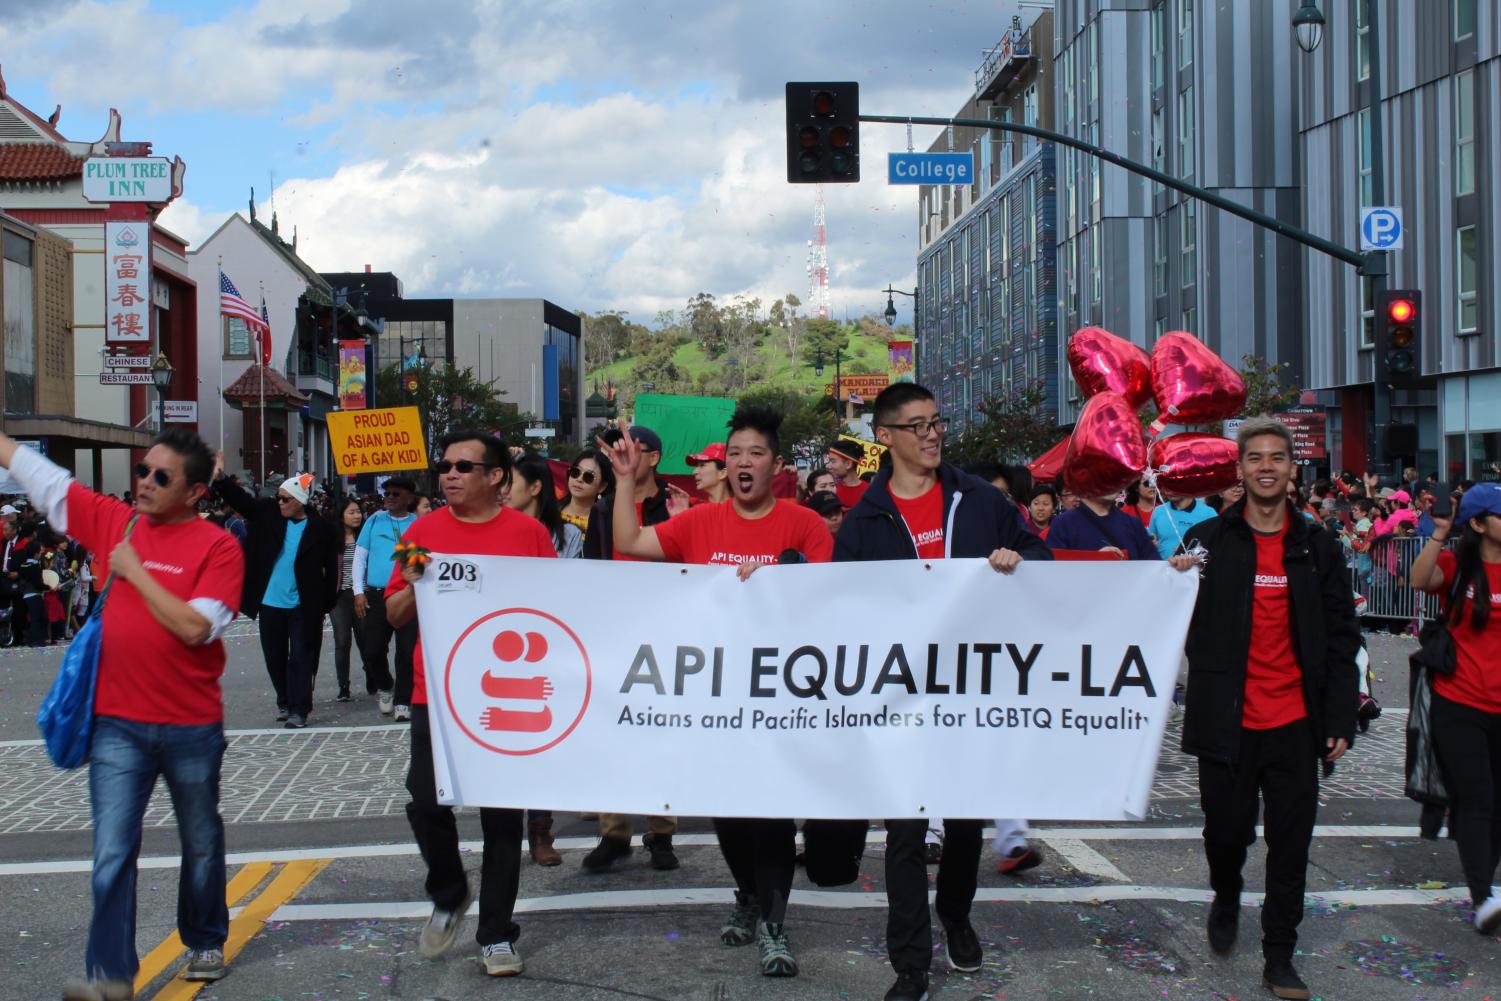 LGBTQ Asian and Pacific Islanders marched with allies at the annual Lunar New Year Parade in Chinatown to promote visibility and equality. The parade took place on Feb. 9.